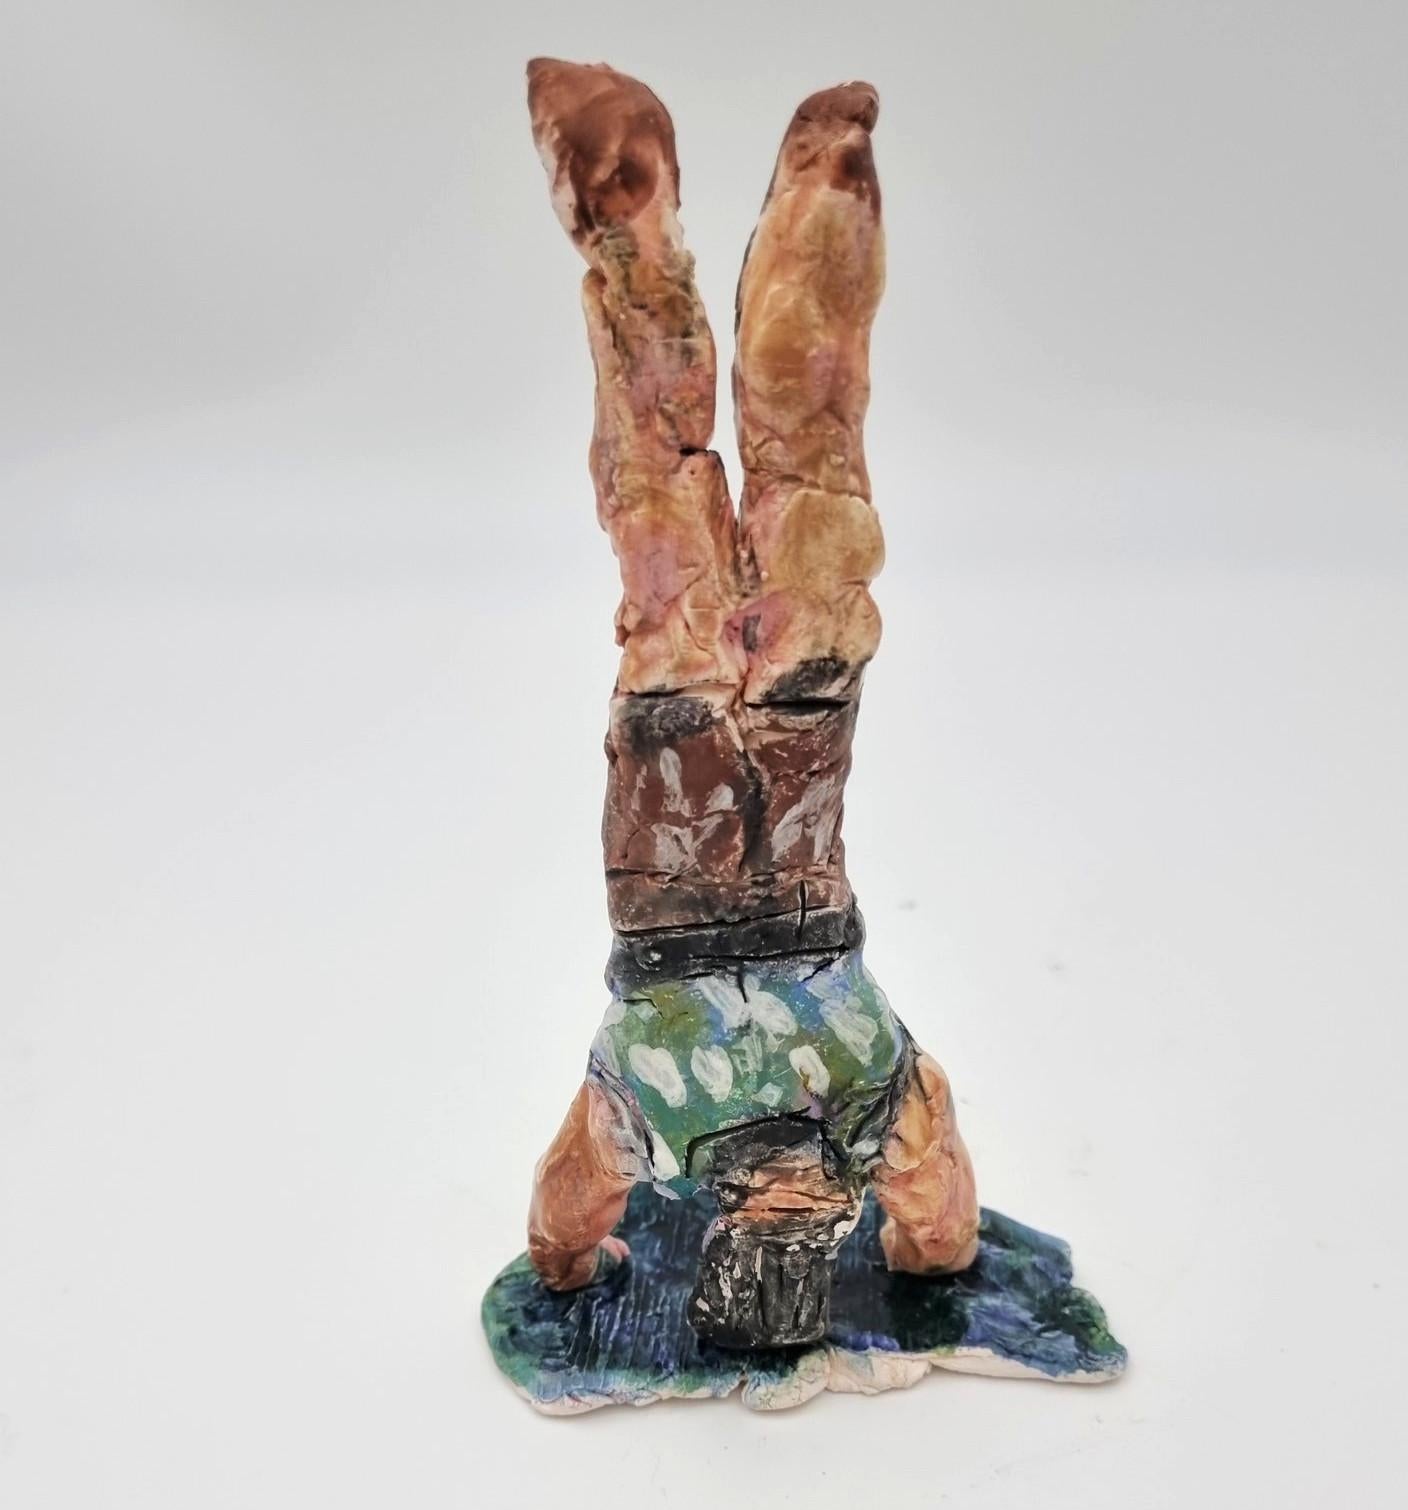 Ann Rothman
Headstand Acrobat (Circus, Whimsical, Viola Frey, Delicate, Playful, Fun, Cirque du Soleil, The Ringling Bros., Barnum & Bailey)
2021
Porcelain, Low Fire Glazes, Crayons, Watercolors
Fired Cone 06, 04
6.25 x 3.5 x 3 inches
COA